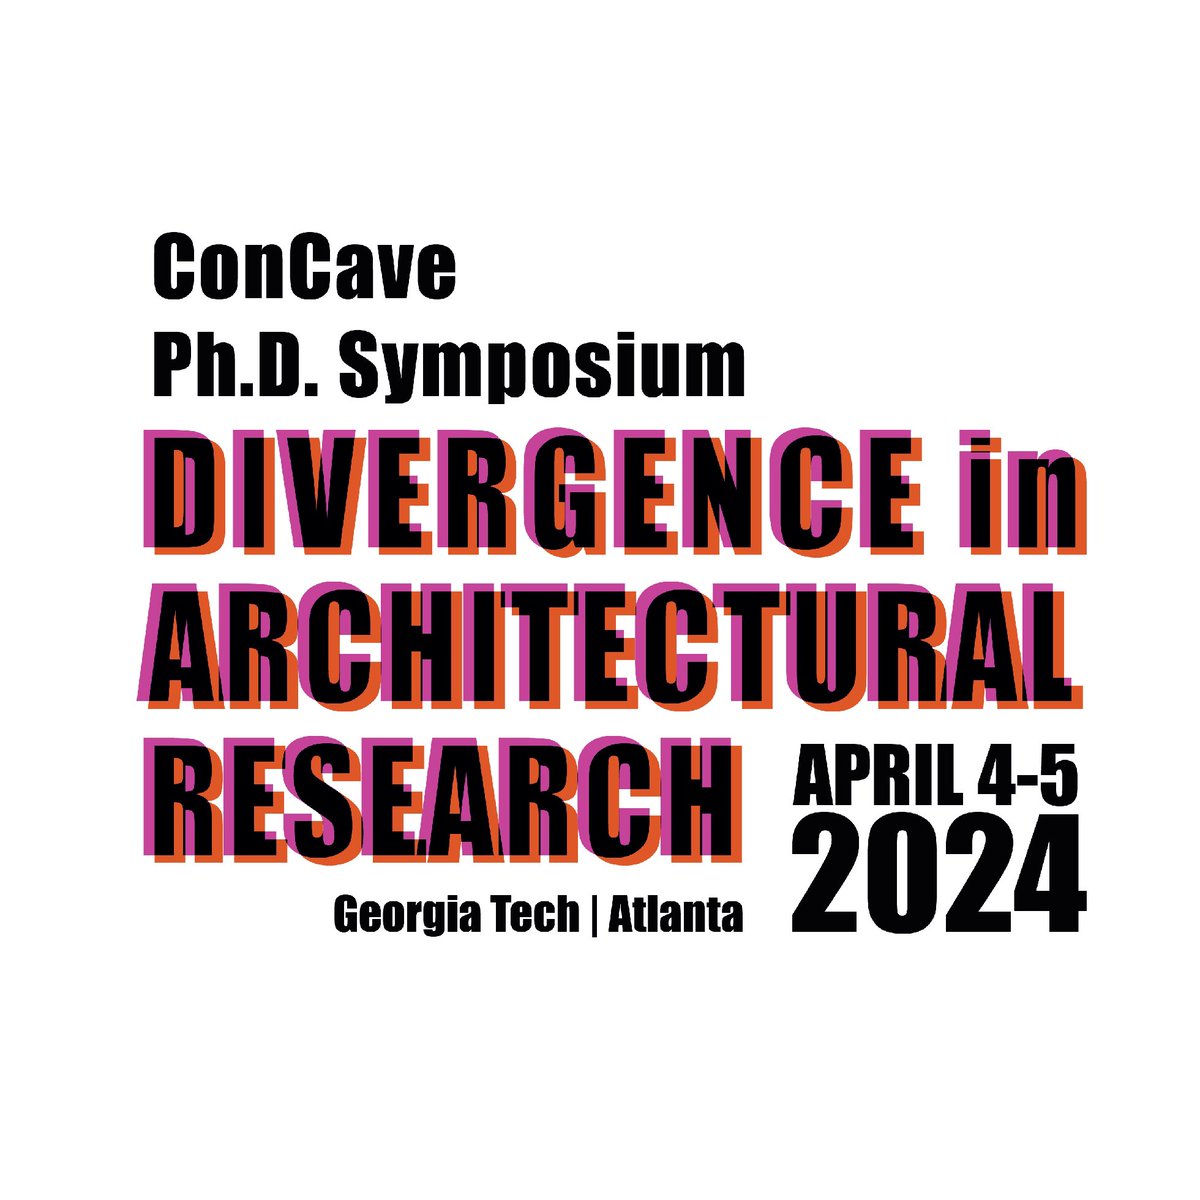 📣 Calling all #PhD researchers in #architecture! We're thrilled to announce that the call for abstracts for the ConCave PhD Symposium is now open! Don't miss this chance to share your cutting-edge research and network with leading minds in the field. #PhDSymposium #Architecture